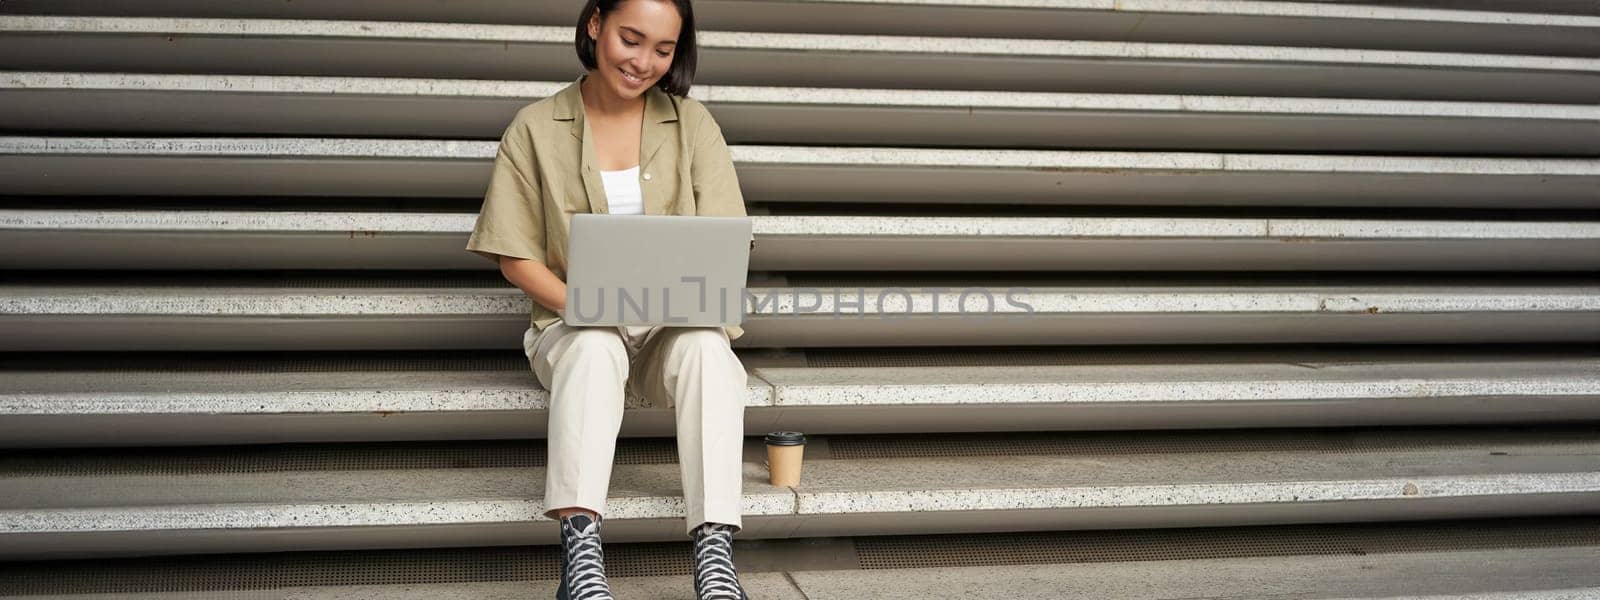 Portrait of young asian woman using her laptop, sitting outdoors on stairs. Happy smiling girl with personal computer.